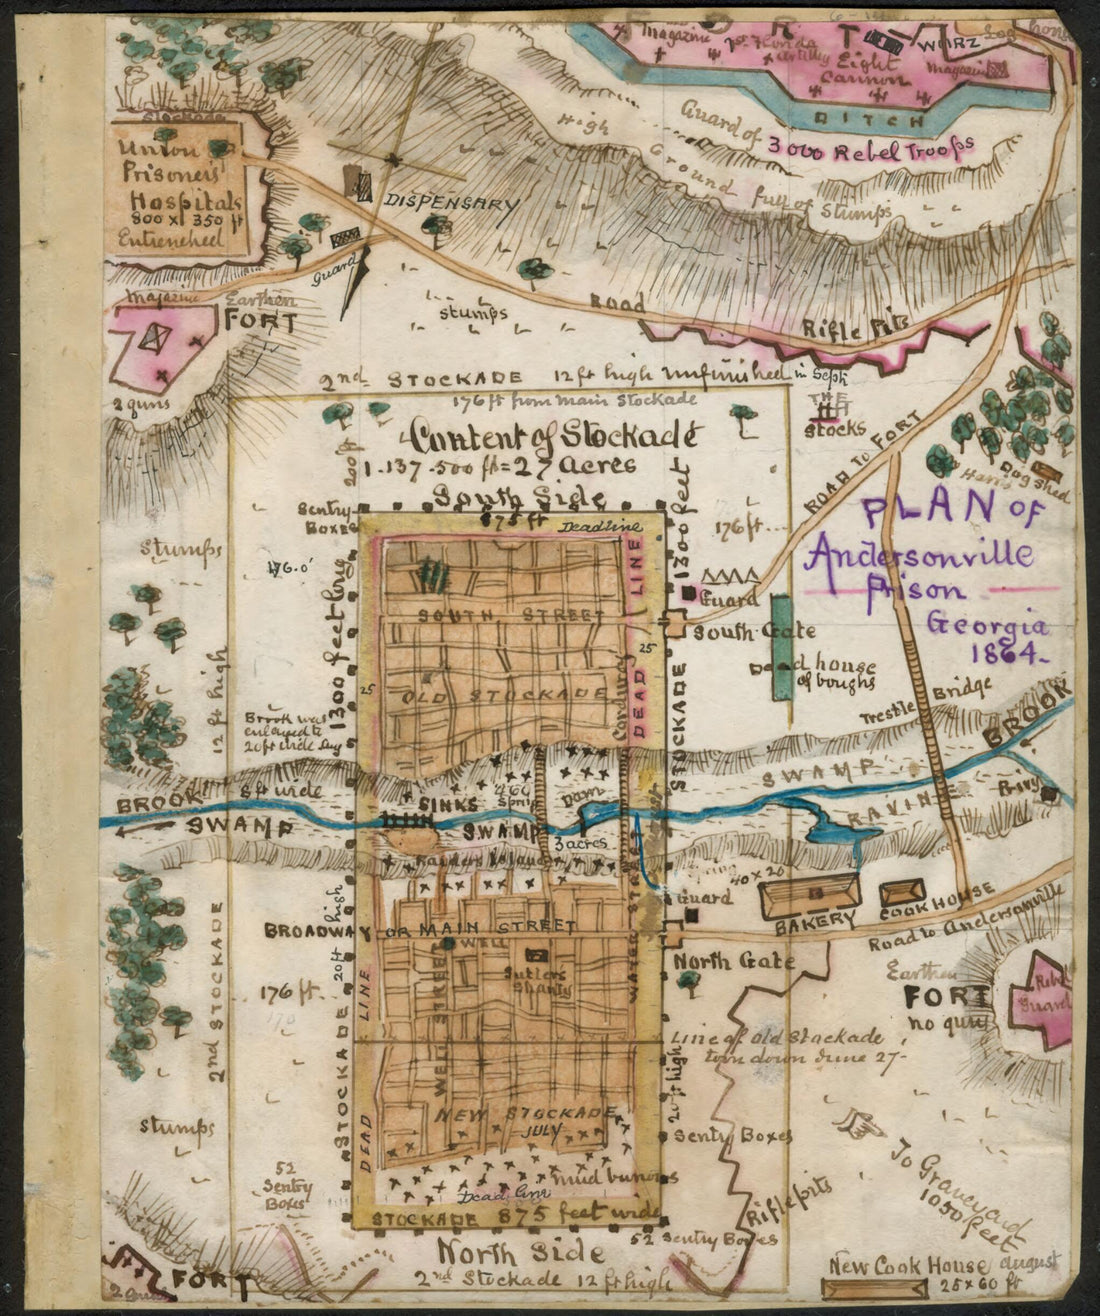 This old map of Plan of Andersonville Prison, Georgia from 1864 was created by Robert Knox Sneden in 1864